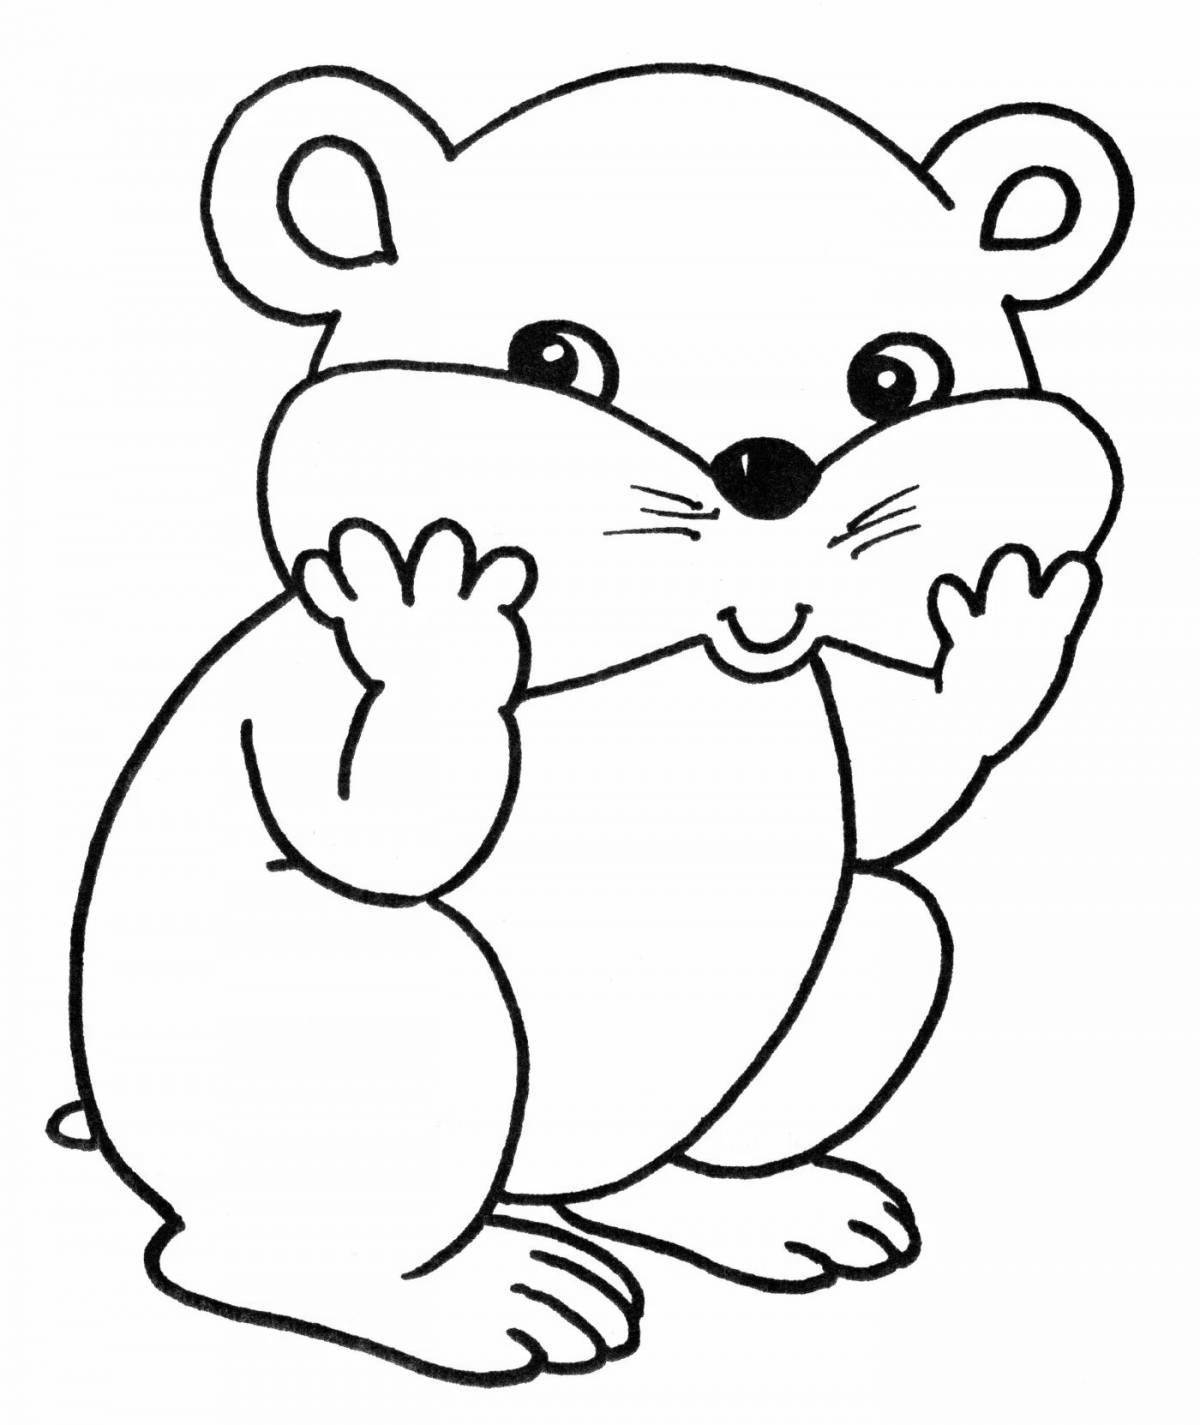 Coloring book playful hamster